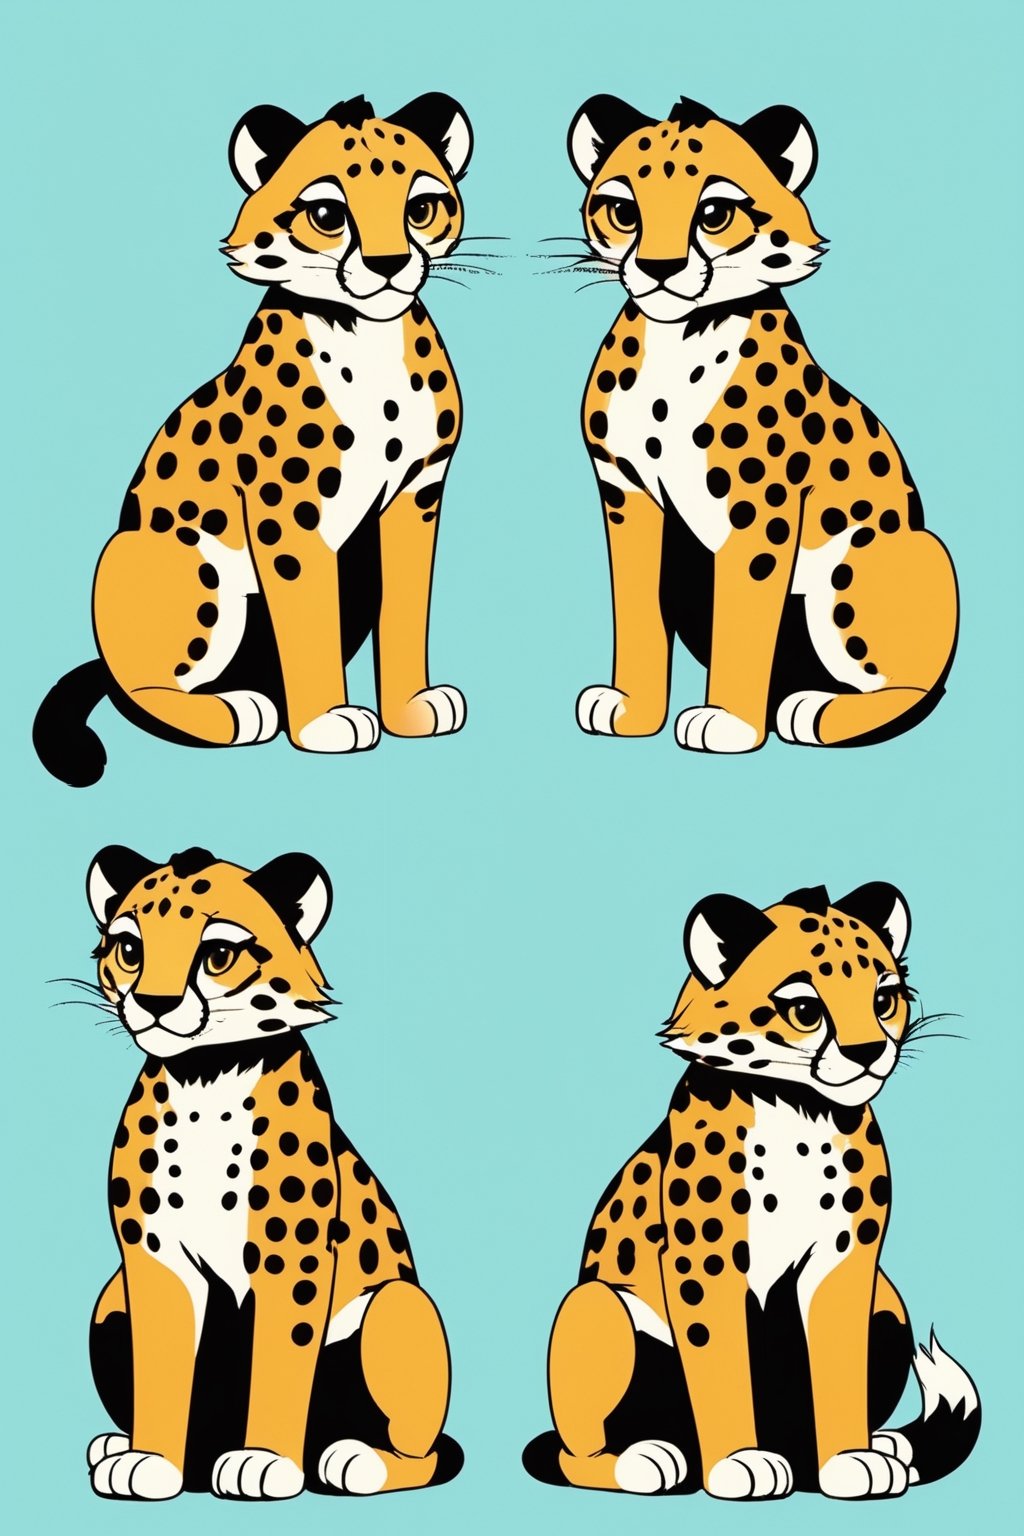 Create a character sheet with studio ghibli animation for cheetah cub. Not looking like human. Sits on his feet. Mischievous look